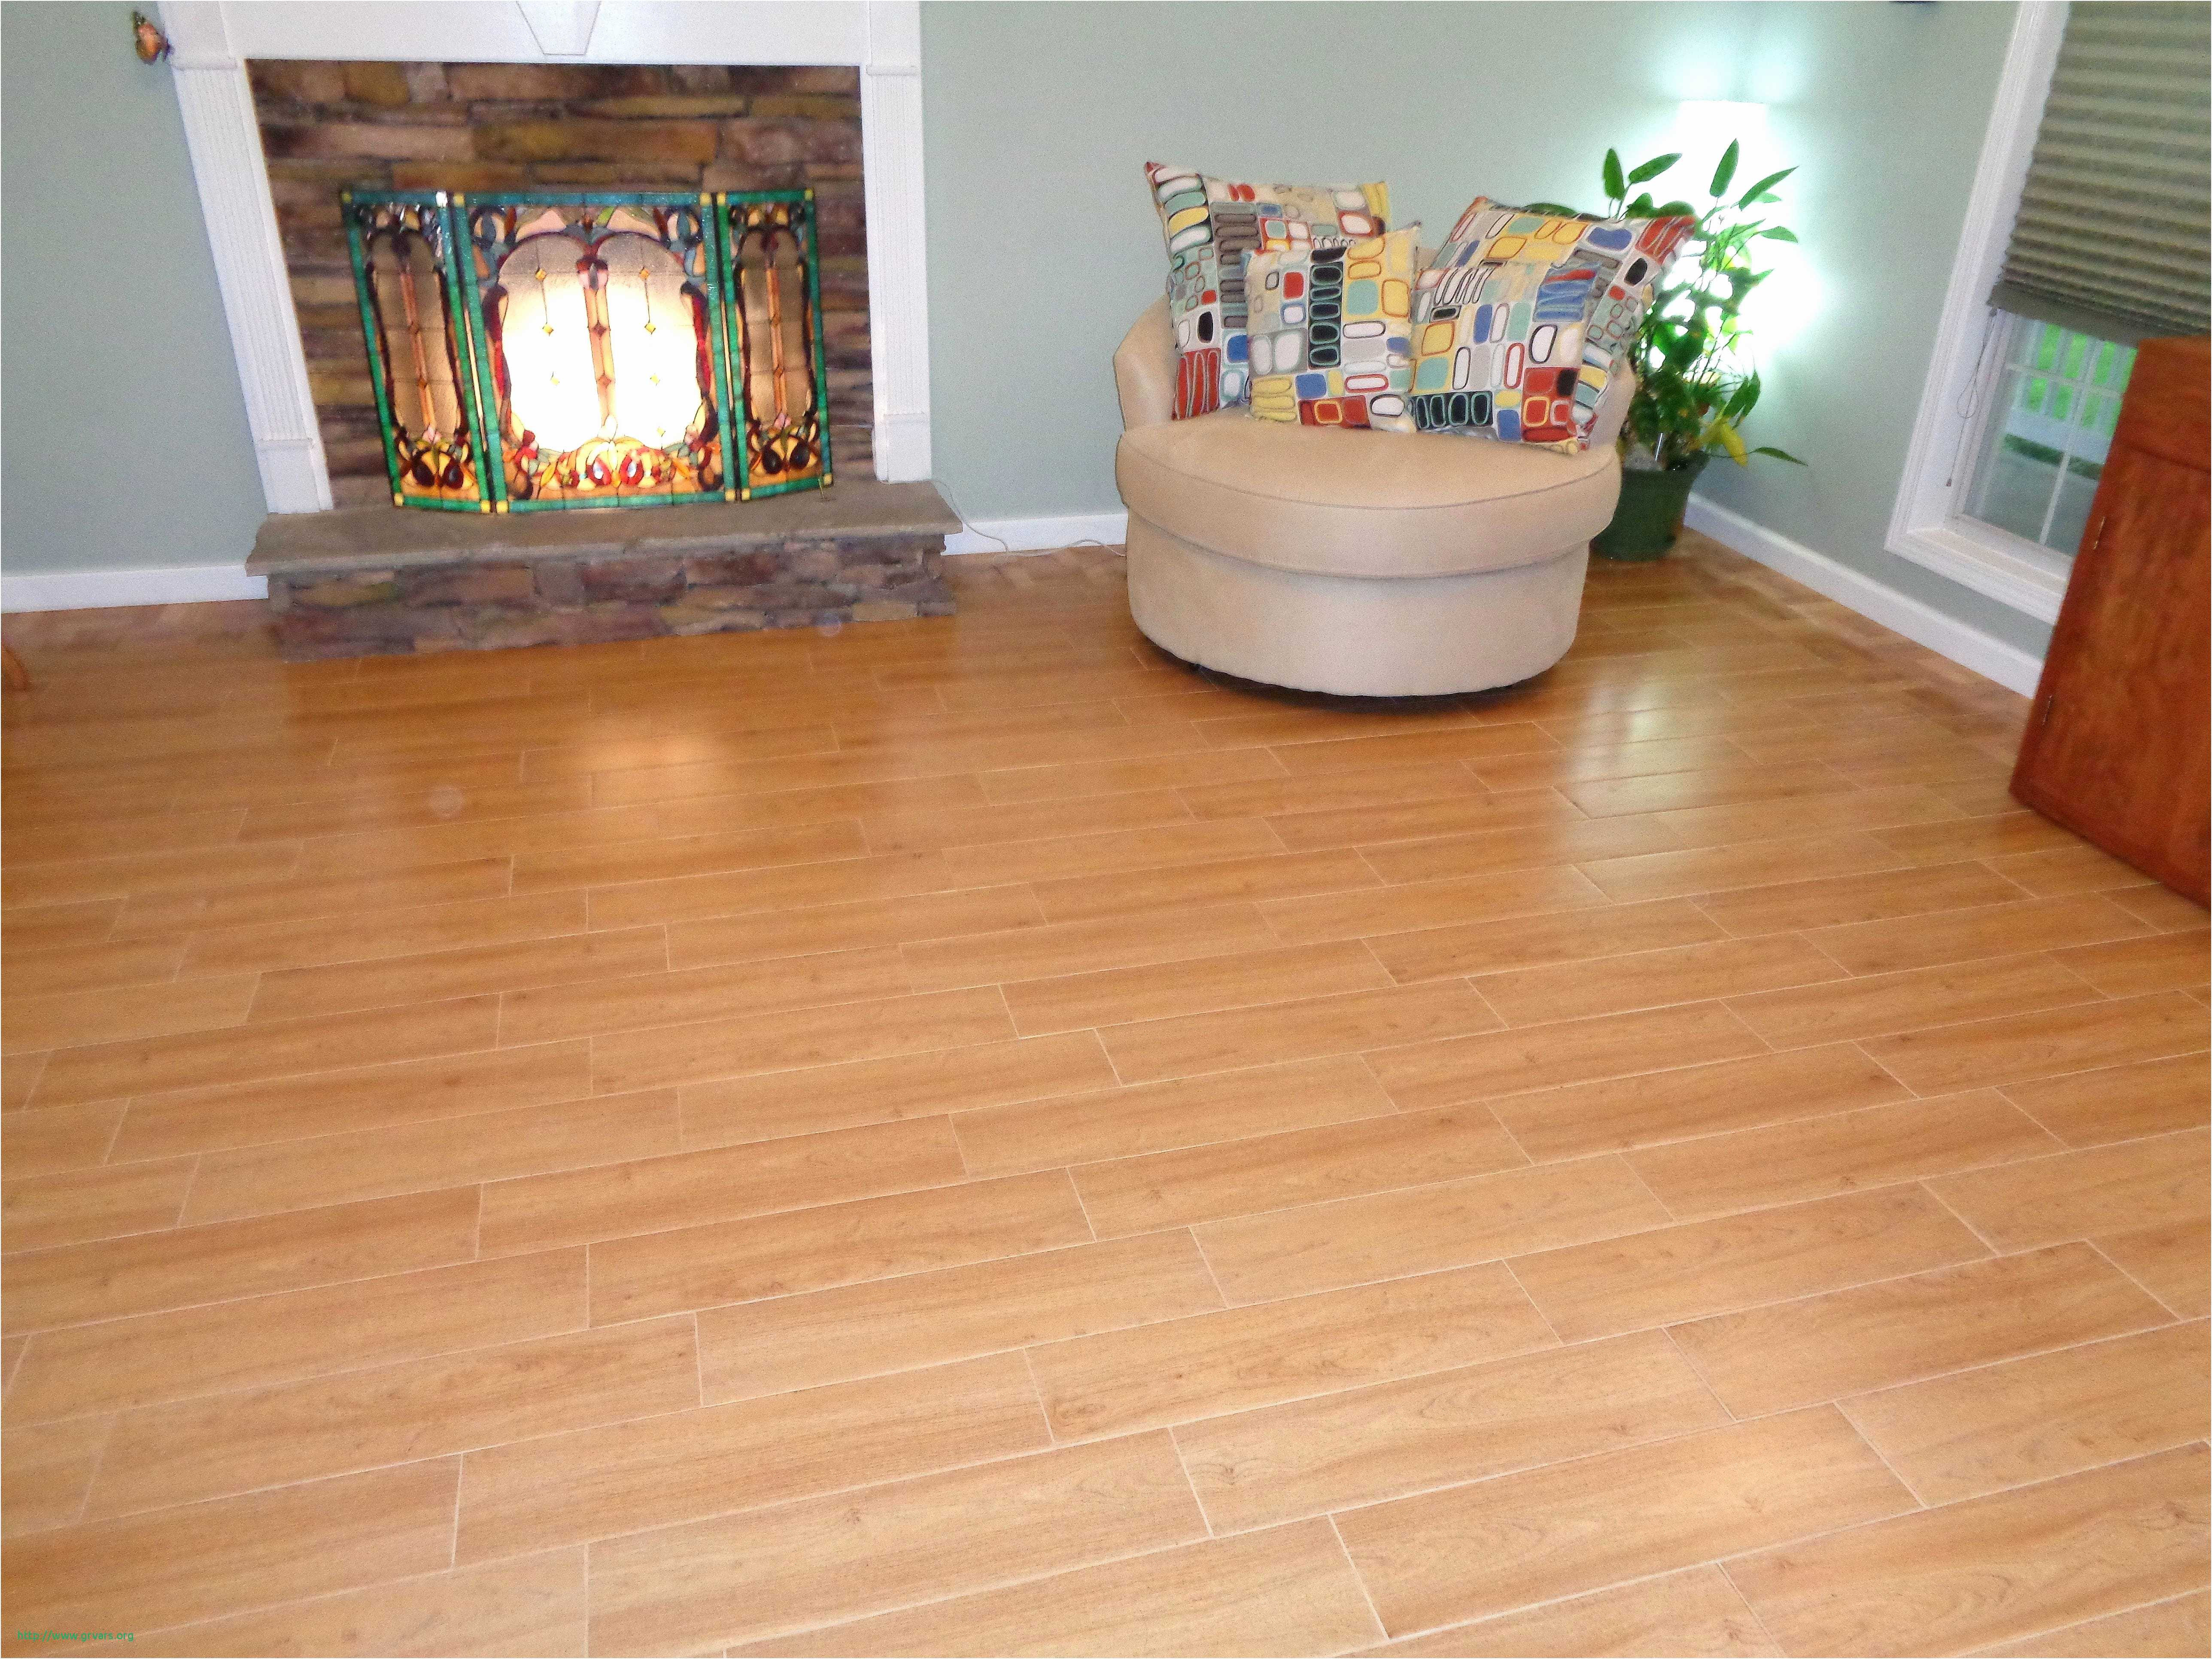 acacia solid hardwood flooring of 24 inspirant how much are wood floors ideas blog throughout how much are wood floors beau laminated wooden flooring prices guide to solid hardwood floors